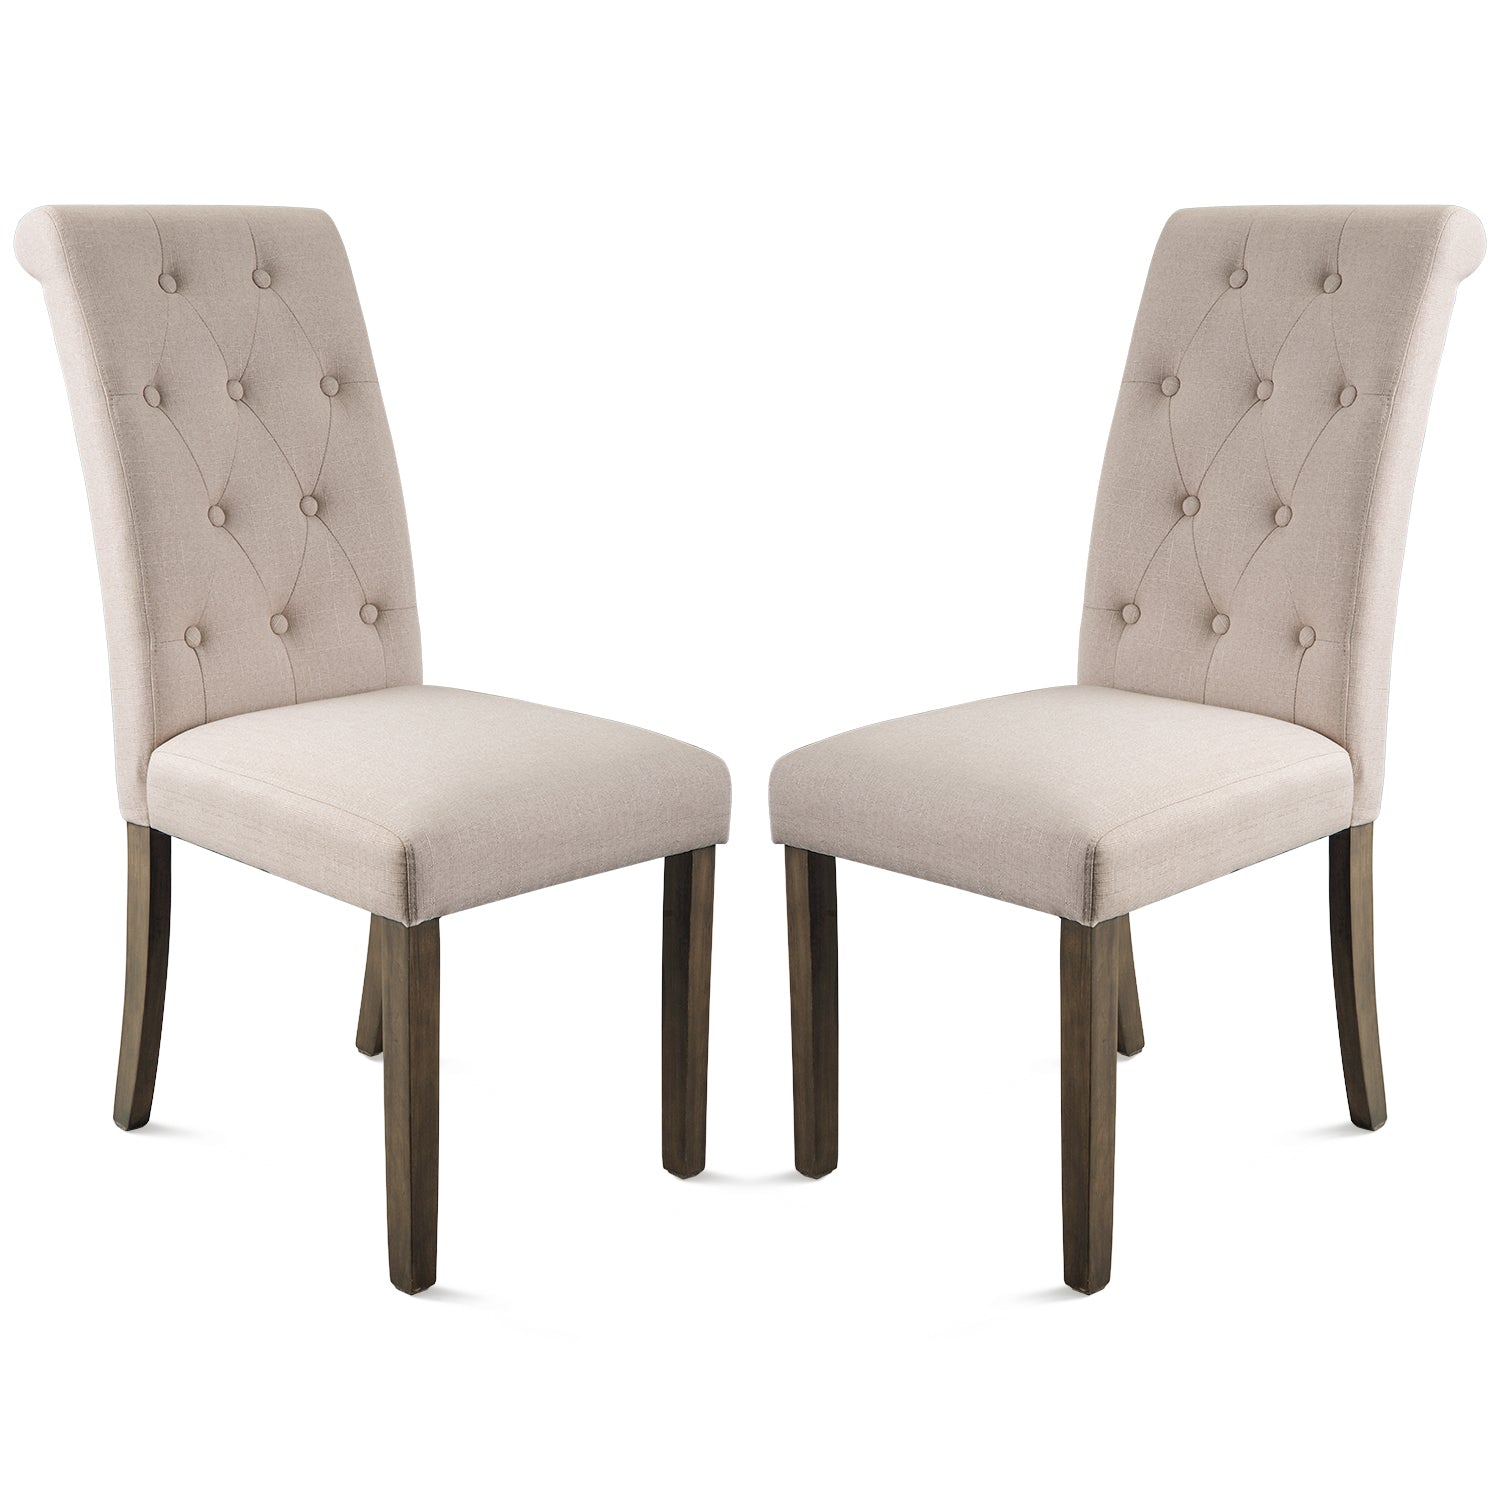 Aristocratic Style Dining Chair Noble and Elegant Solid Wood Tufted Dining Chair Dining Room Set (Set of 2)-Boyel Living